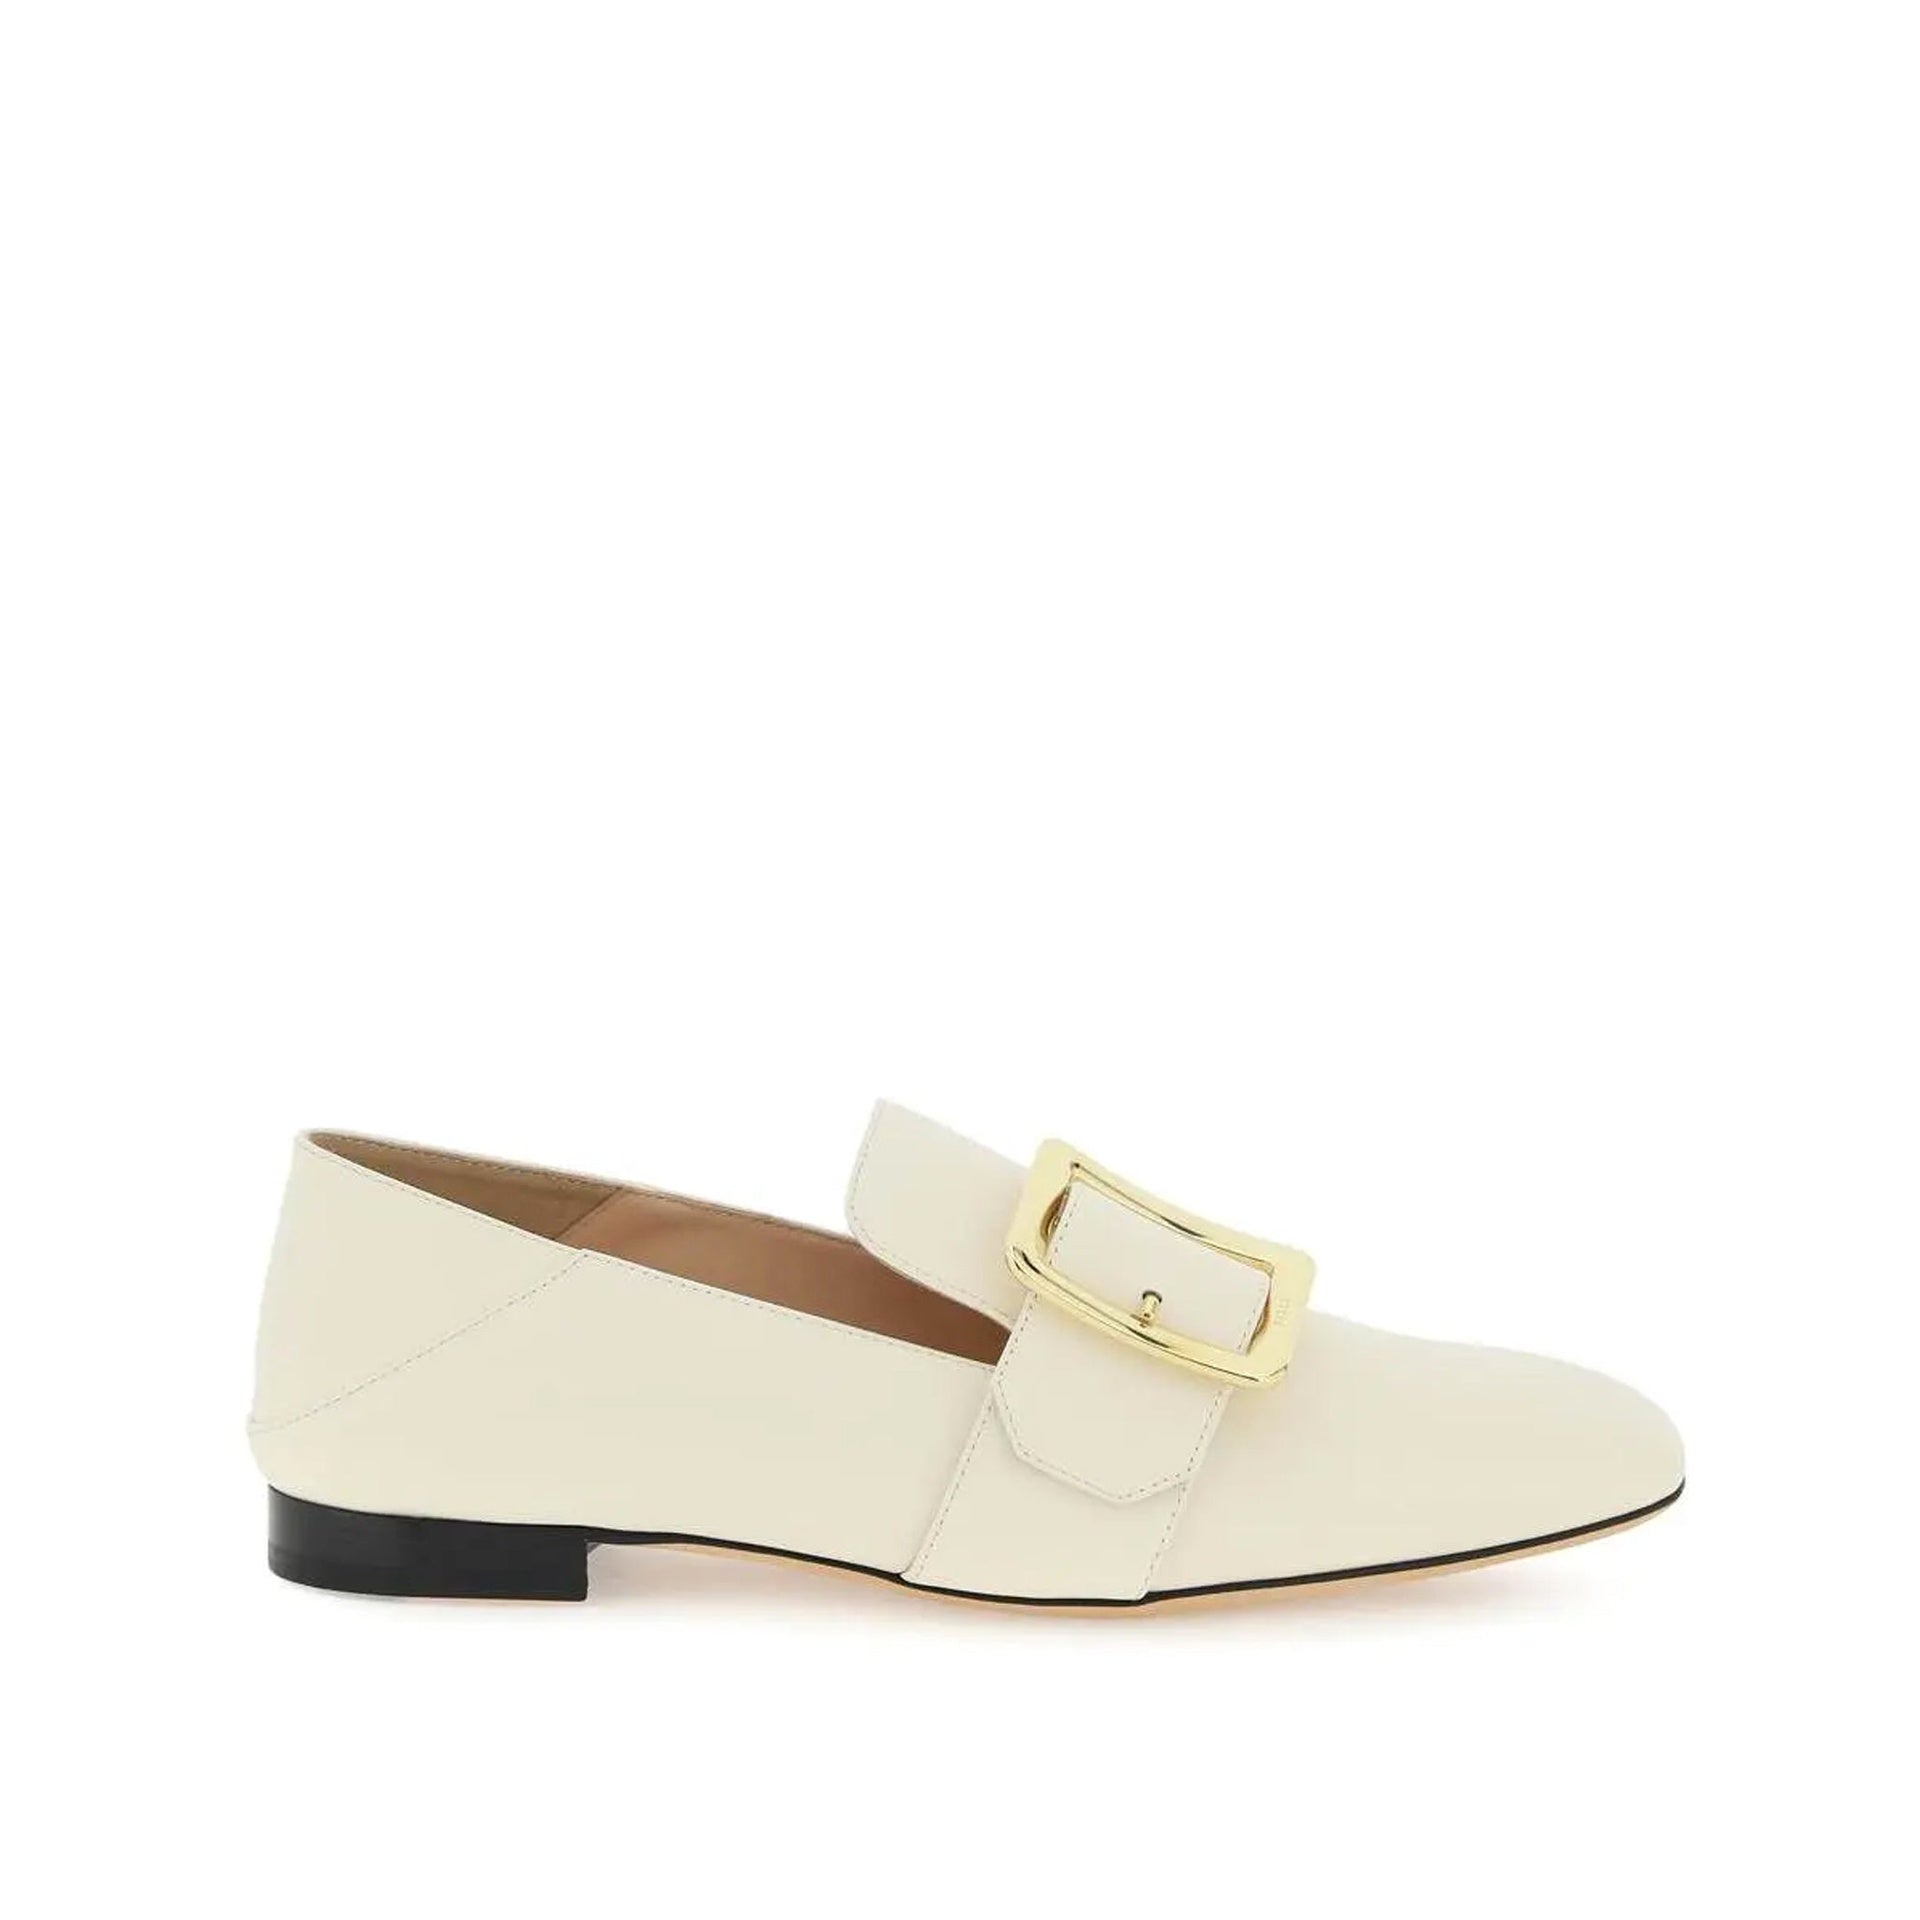 BALLY-OUTLET-SALE-Bally-Leather-Loafers-Flache-Schuhe-WHITE-36-ARCHIVE-COLLECTION.jpg